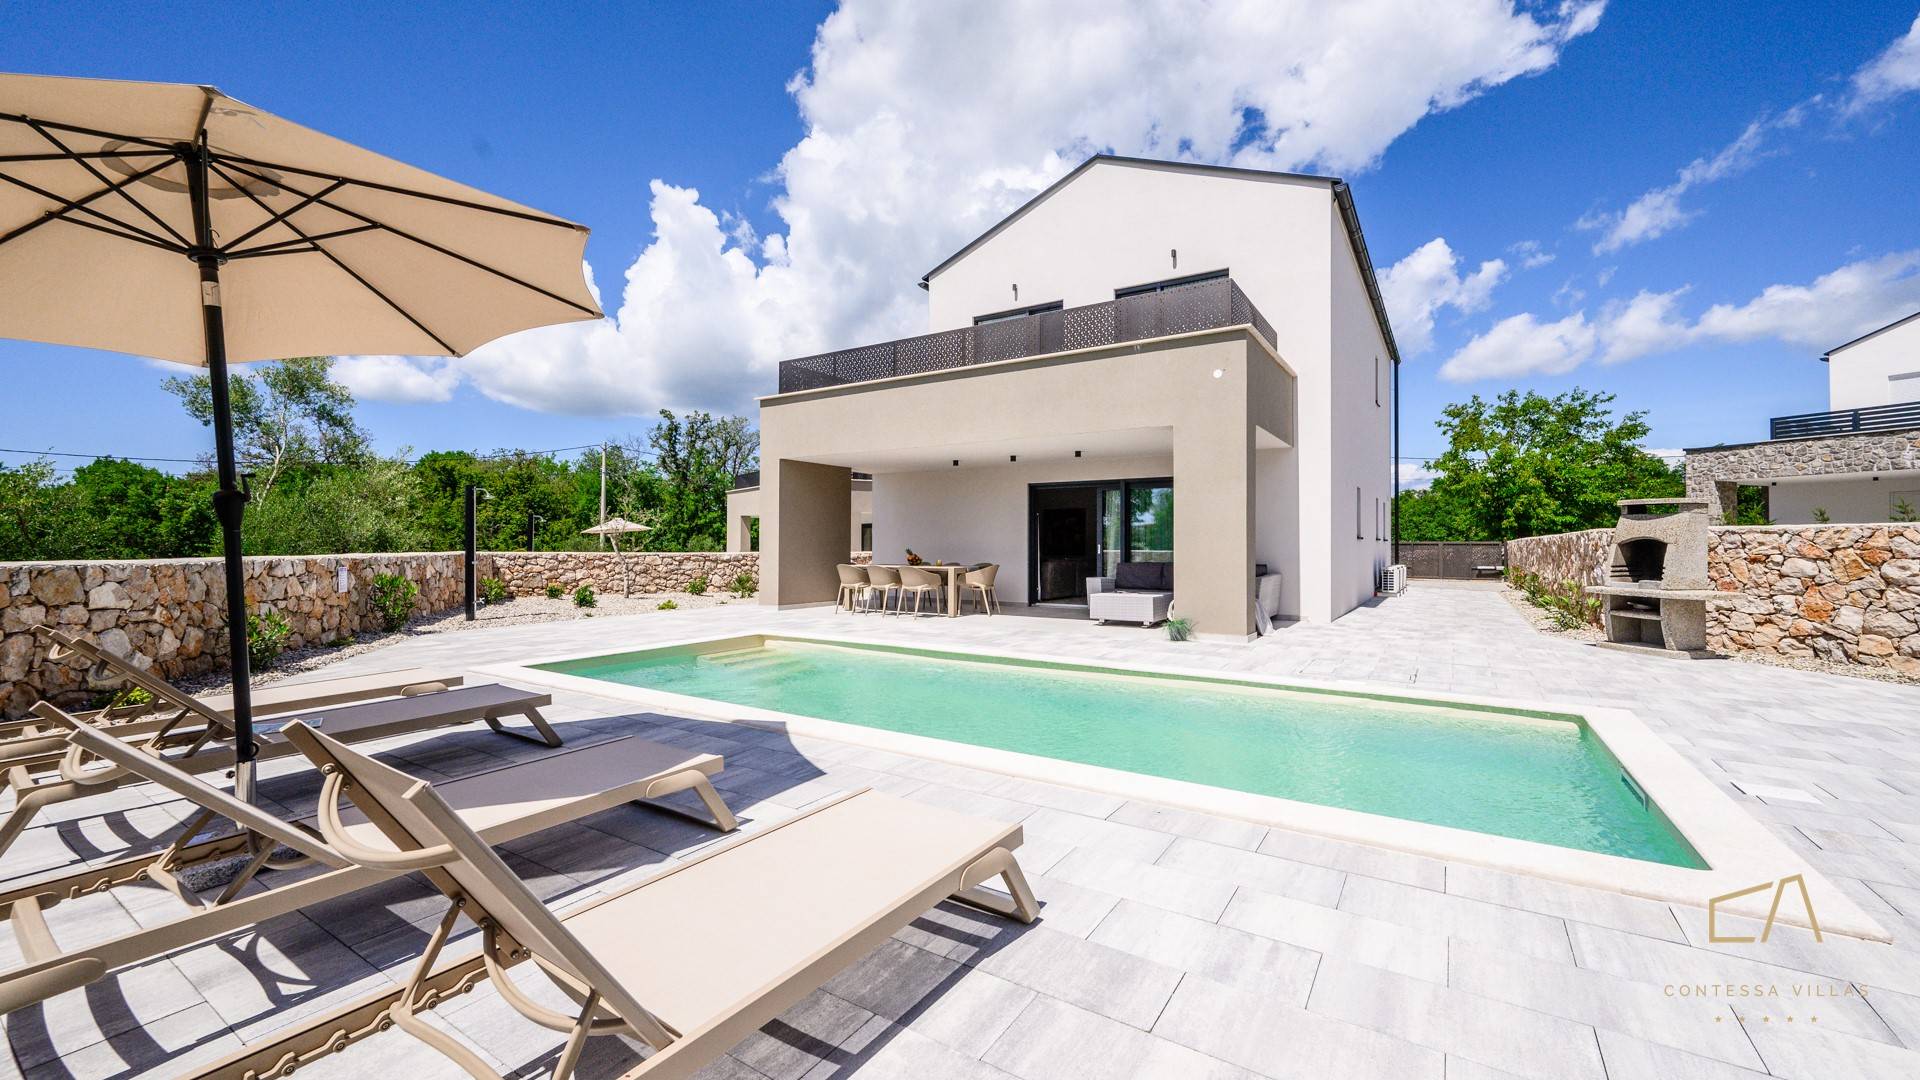 Modern and equipped villa with pool and garden - for sale!